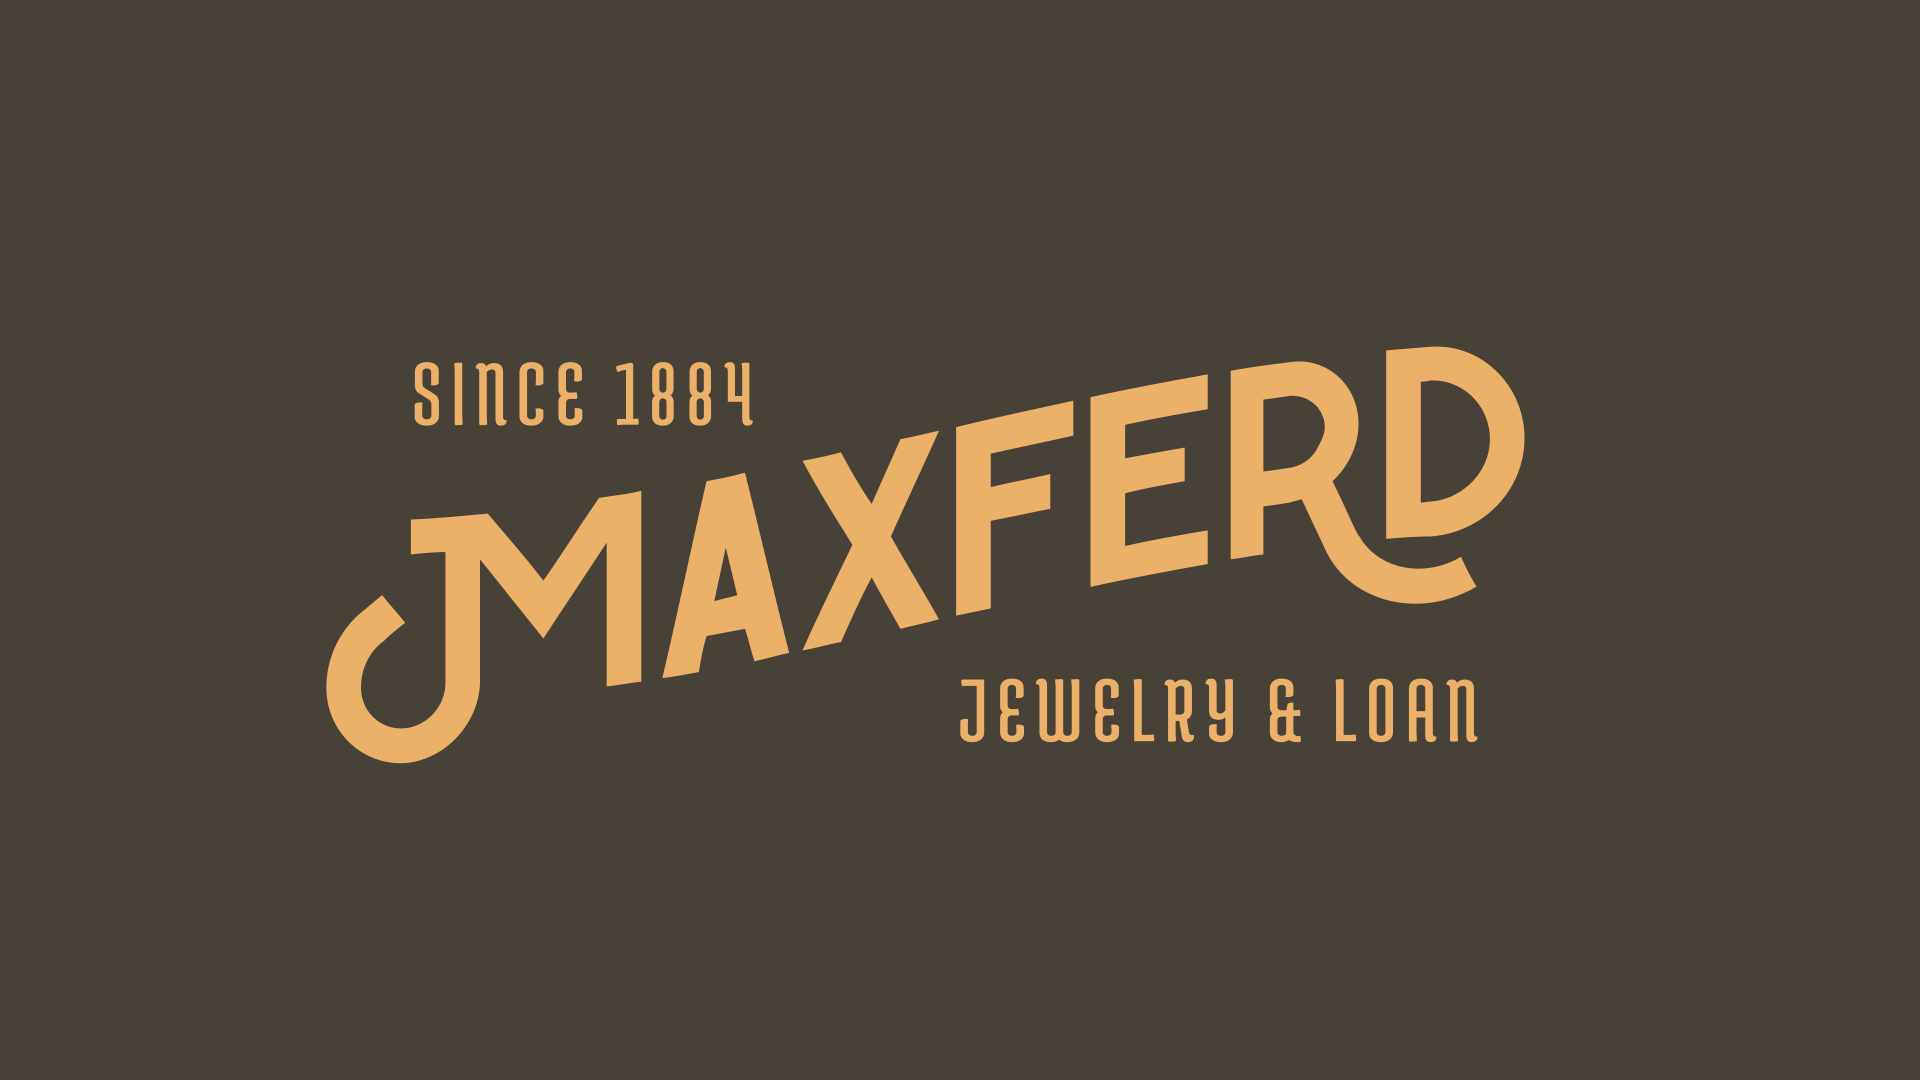 Maxferd Jewelry & Loan Announces 0% Interest Rate on Single Loans Less Than $2,500 for New Customers in All Five California Stores